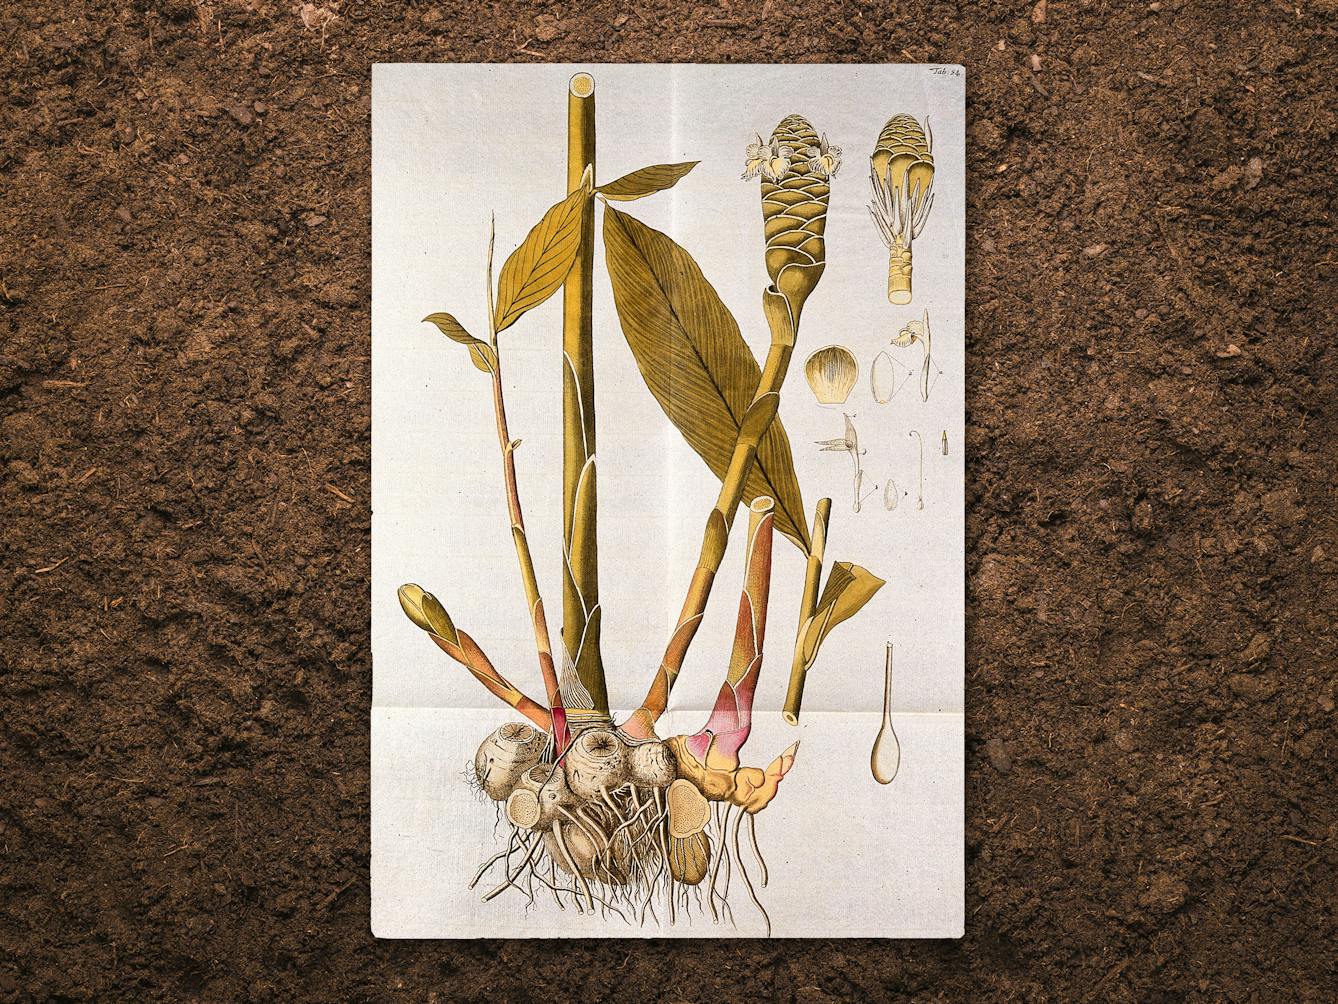 Digital composite image of a botanical drawing resting slightly above a brown earth background, casting a subtle shadow. The drawing shows the flowering stem with rhizome and separate leaf, inflorescence and floral segments, of a ginger plant. The colours are greens, browns and purples.